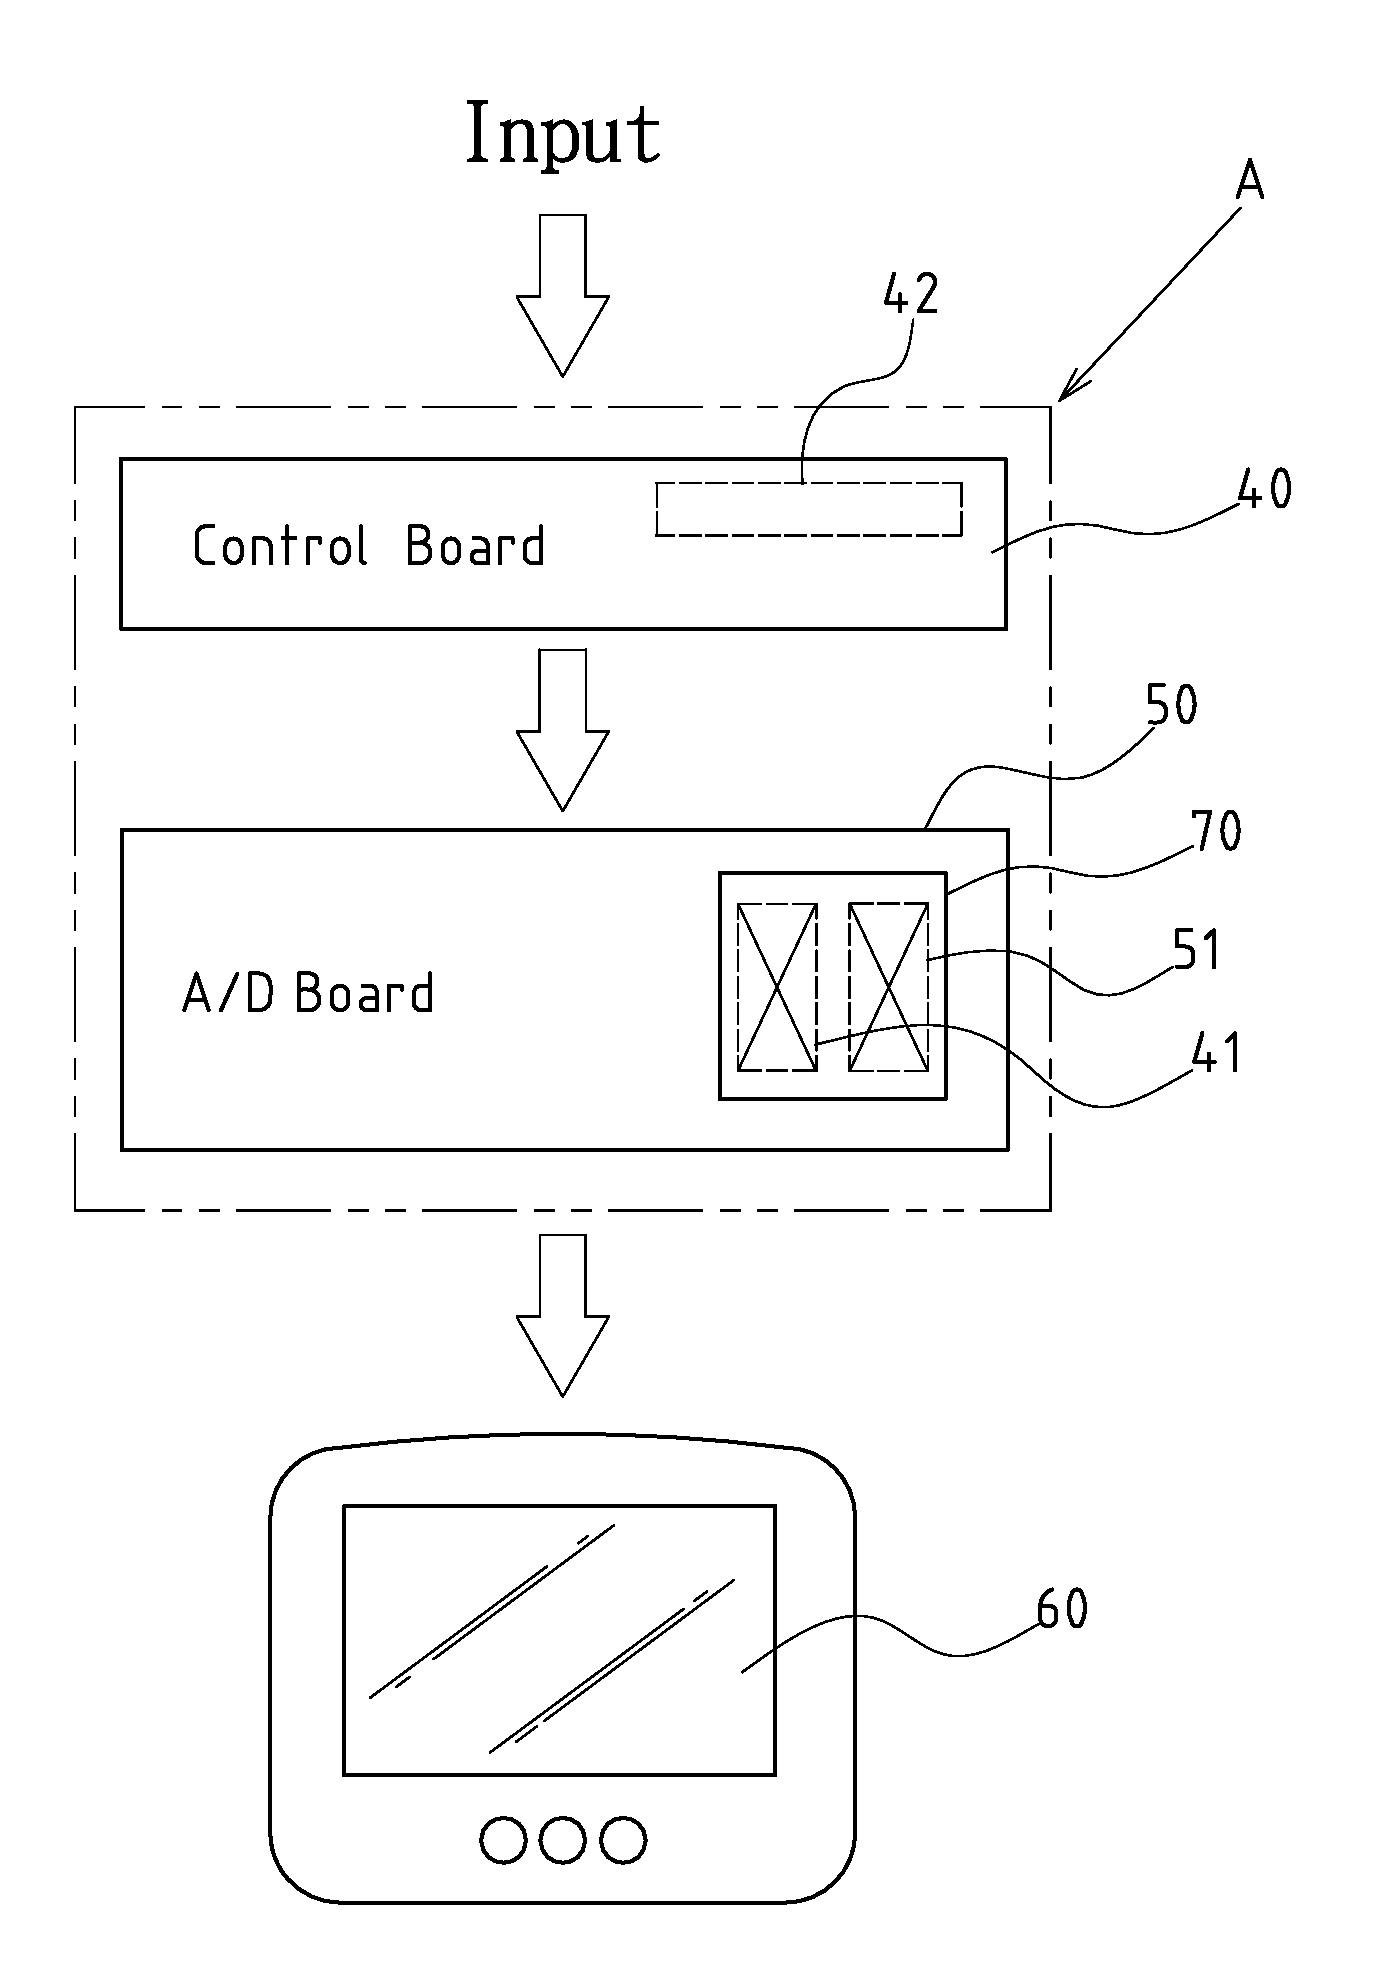 Control panel assembly method for a fitness equipment meter